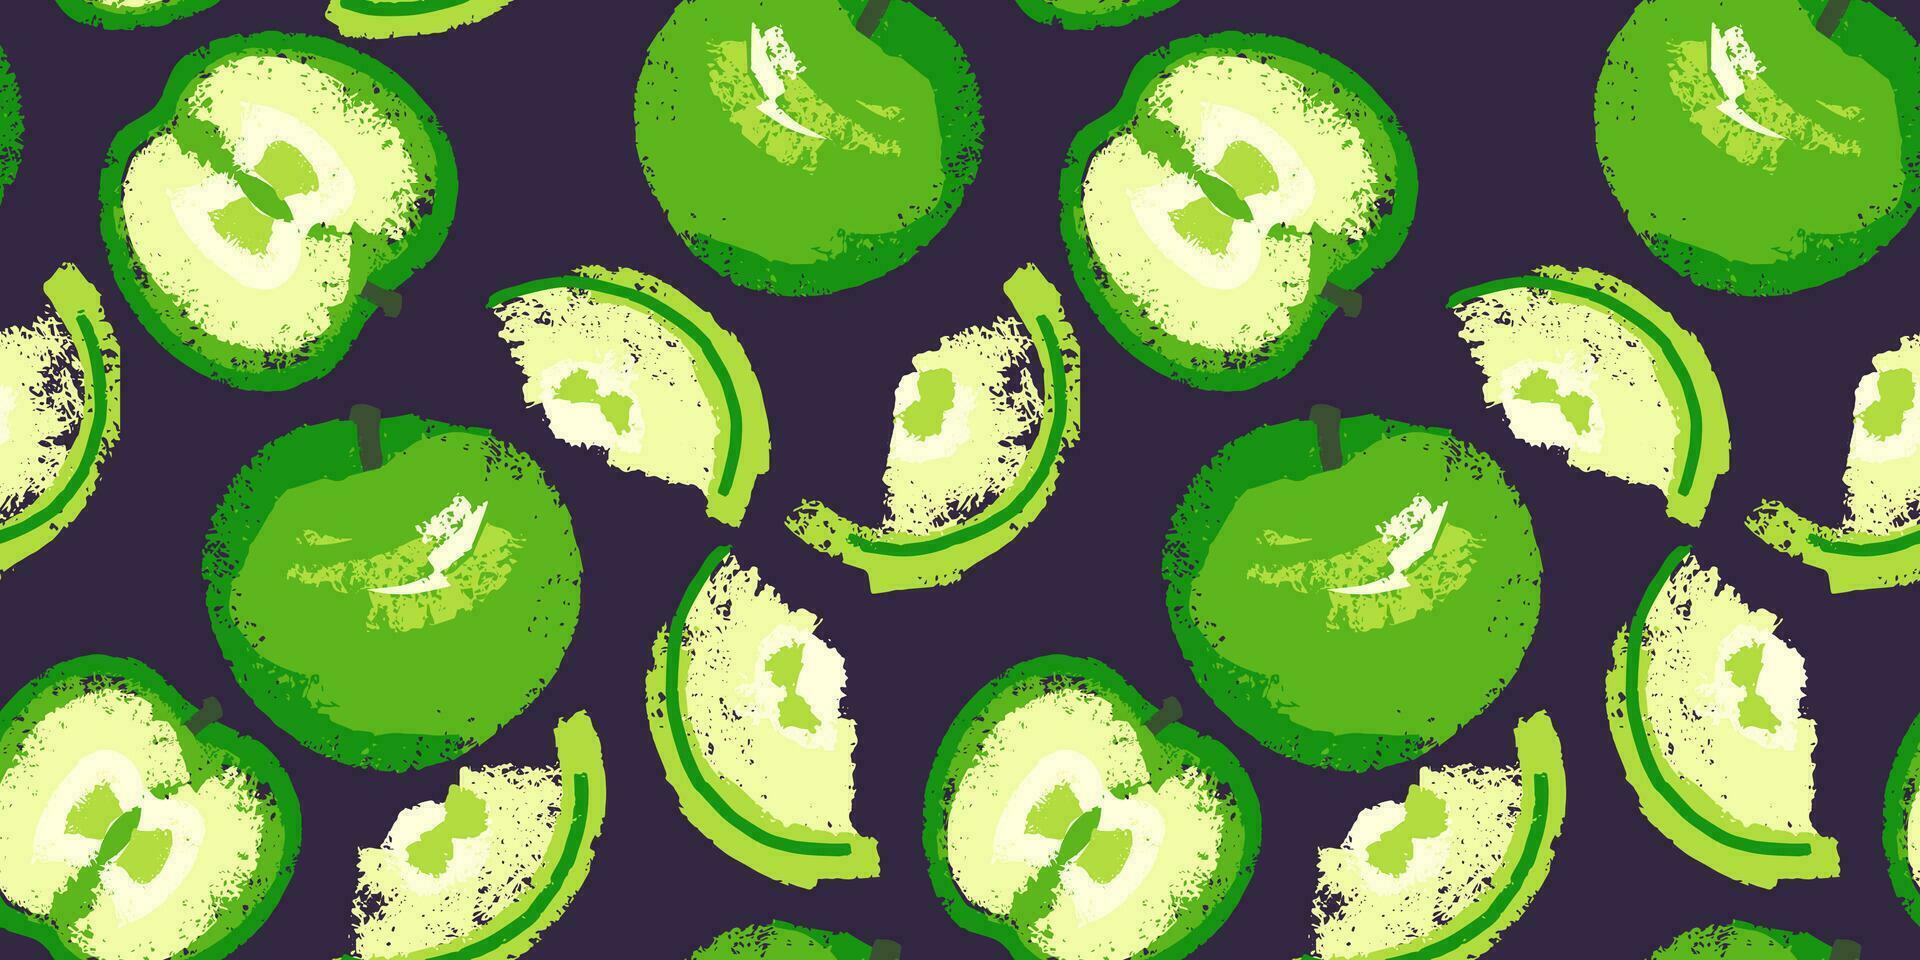 Creative seamless pattern with apples and apple slices. Stylized vector hand drawn sketch fruits. Summer fruits background. Apples brush texture print.